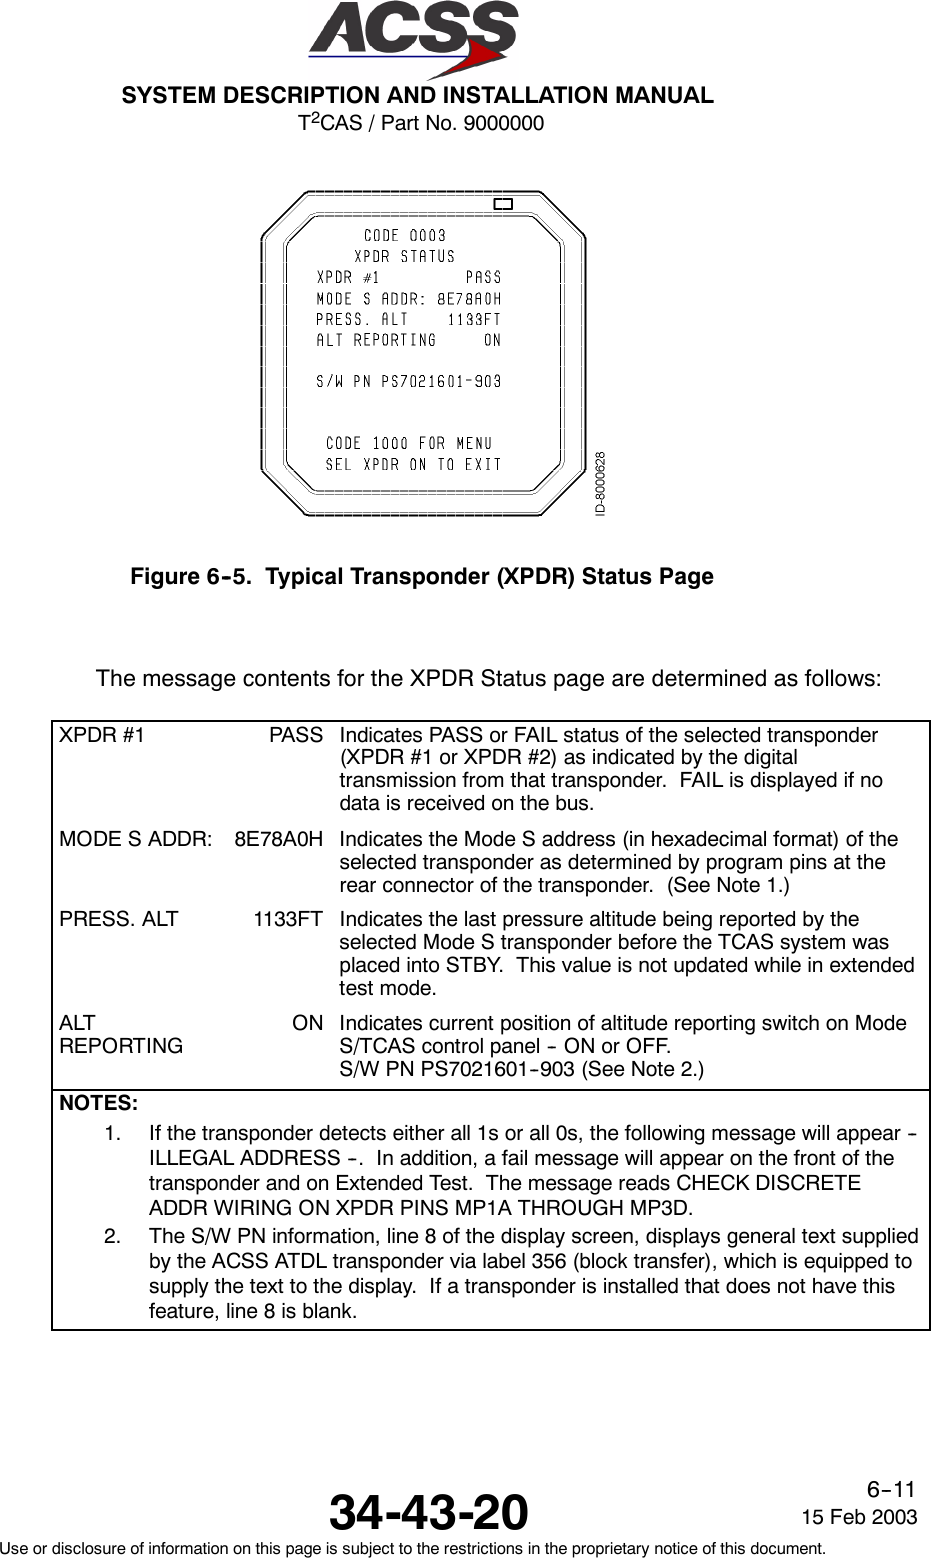 T2CAS / Part No. 9000000SYSTEM DESCRIPTION AND INSTALLATION MANUAL34-43-20 15 Feb 2003Use or disclosure of information on this page is subject to the restrictions in the proprietary notice of this document.6--11Figure 6--5. Typical Transponder (XPDR) Status PageThe message contents for the XPDR Status page are determined as follows:XPDR #1 PASS Indicates PASS or FAIL status of the selected transponder(XPDR #1 or XPDR #2) as indicated by the digitaltransmission from that transponder. FAIL is displayed if nodata is received on the bus.MODE S ADDR: 8E78A0H Indicates the Mode S address (in hexadecimal format) of theselected transponder as determined by program pins at therear connector of the transponder. (See Note 1.)PRESS. ALT 1133FT Indicates the last pressure altitude being reported by theselected Mode S transponder before the TCAS system wasplaced into STBY. This value is not updated while in extendedtest mode.ALTREPORTINGON Indicates current position of altitude reporting switch on ModeS/TCAS control panel -- ON or OFF.S/W PN PS7021601--903 (See Note 2.)NOTES:1. If the transponder detects either all 1s or all 0s, the following message will appear --ILLEGAL ADDRESS --. In addition, a fail message will appear on the front of thetransponder and on Extended Test. The message reads CHECK DISCRETEADDR WIRING ON XPDR PINS MP1A THROUGH MP3D.2. The S/W PN information, line 8 of the display screen, displays general text suppliedby the ACSS ATDL transponder via label 356 (block transfer), which is equipped tosupply the text to the display. If a transponder is installed that does not have thisfeature, line 8 is blank.